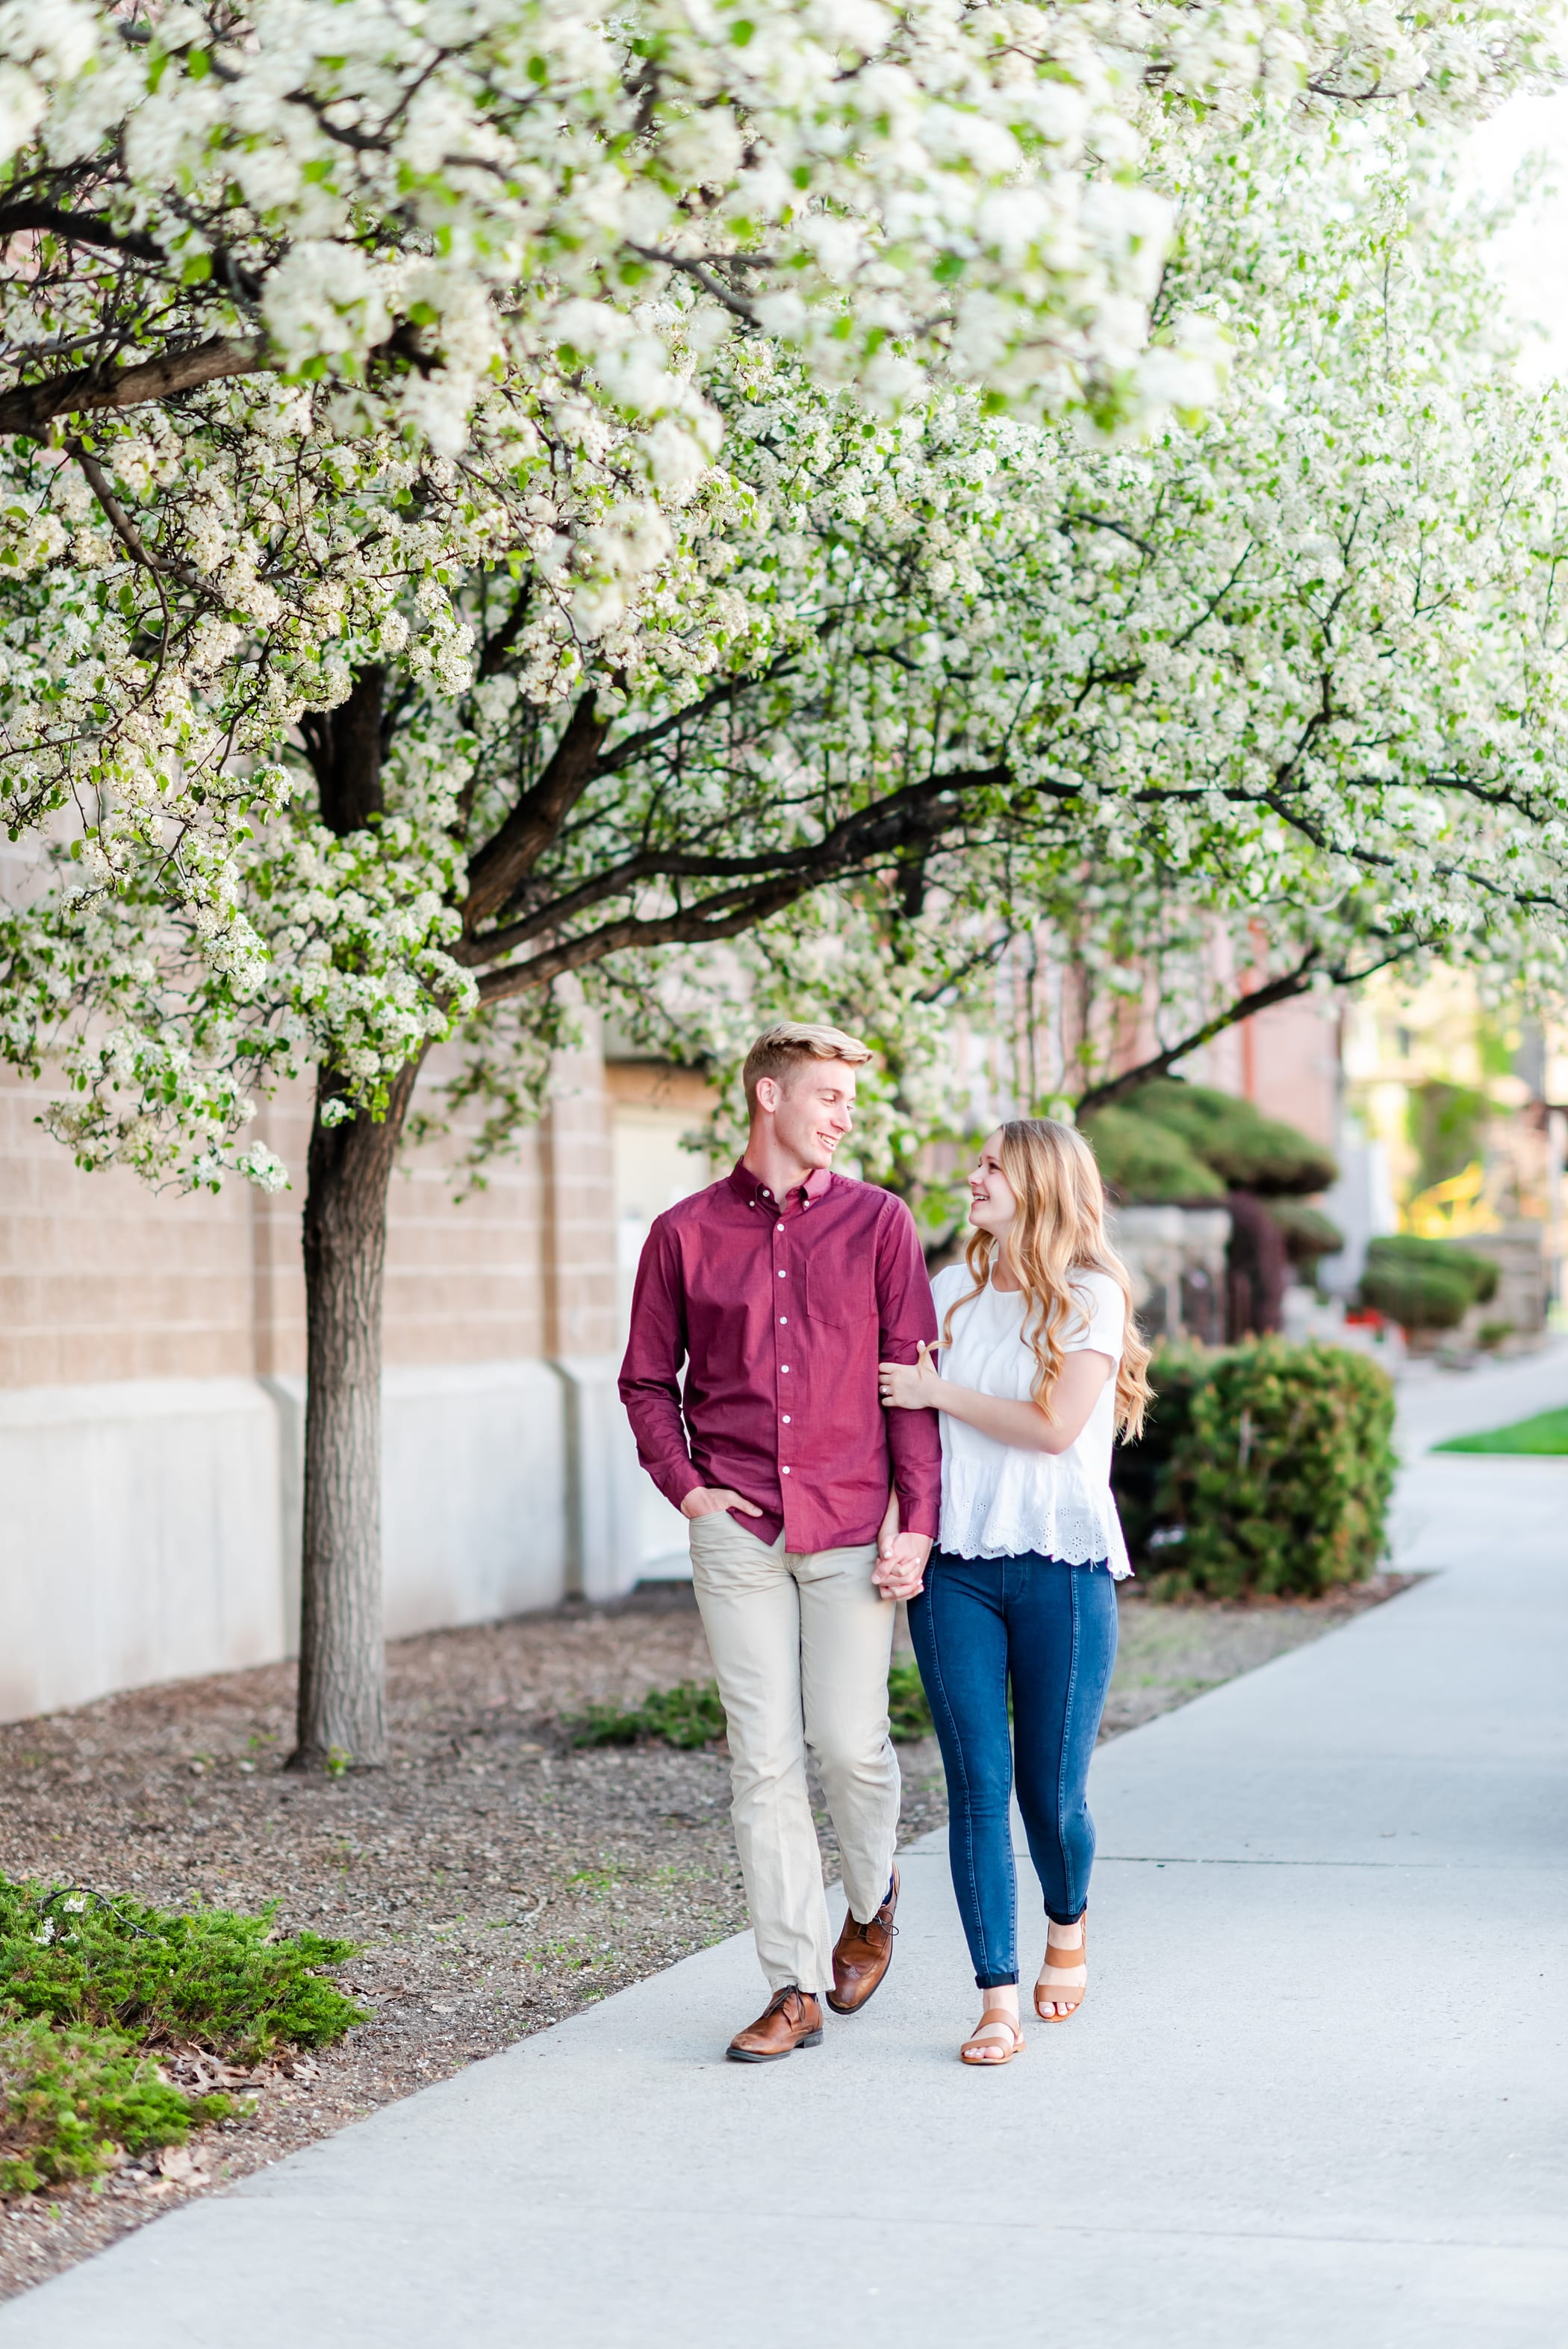 Spring engagements with blossom trees